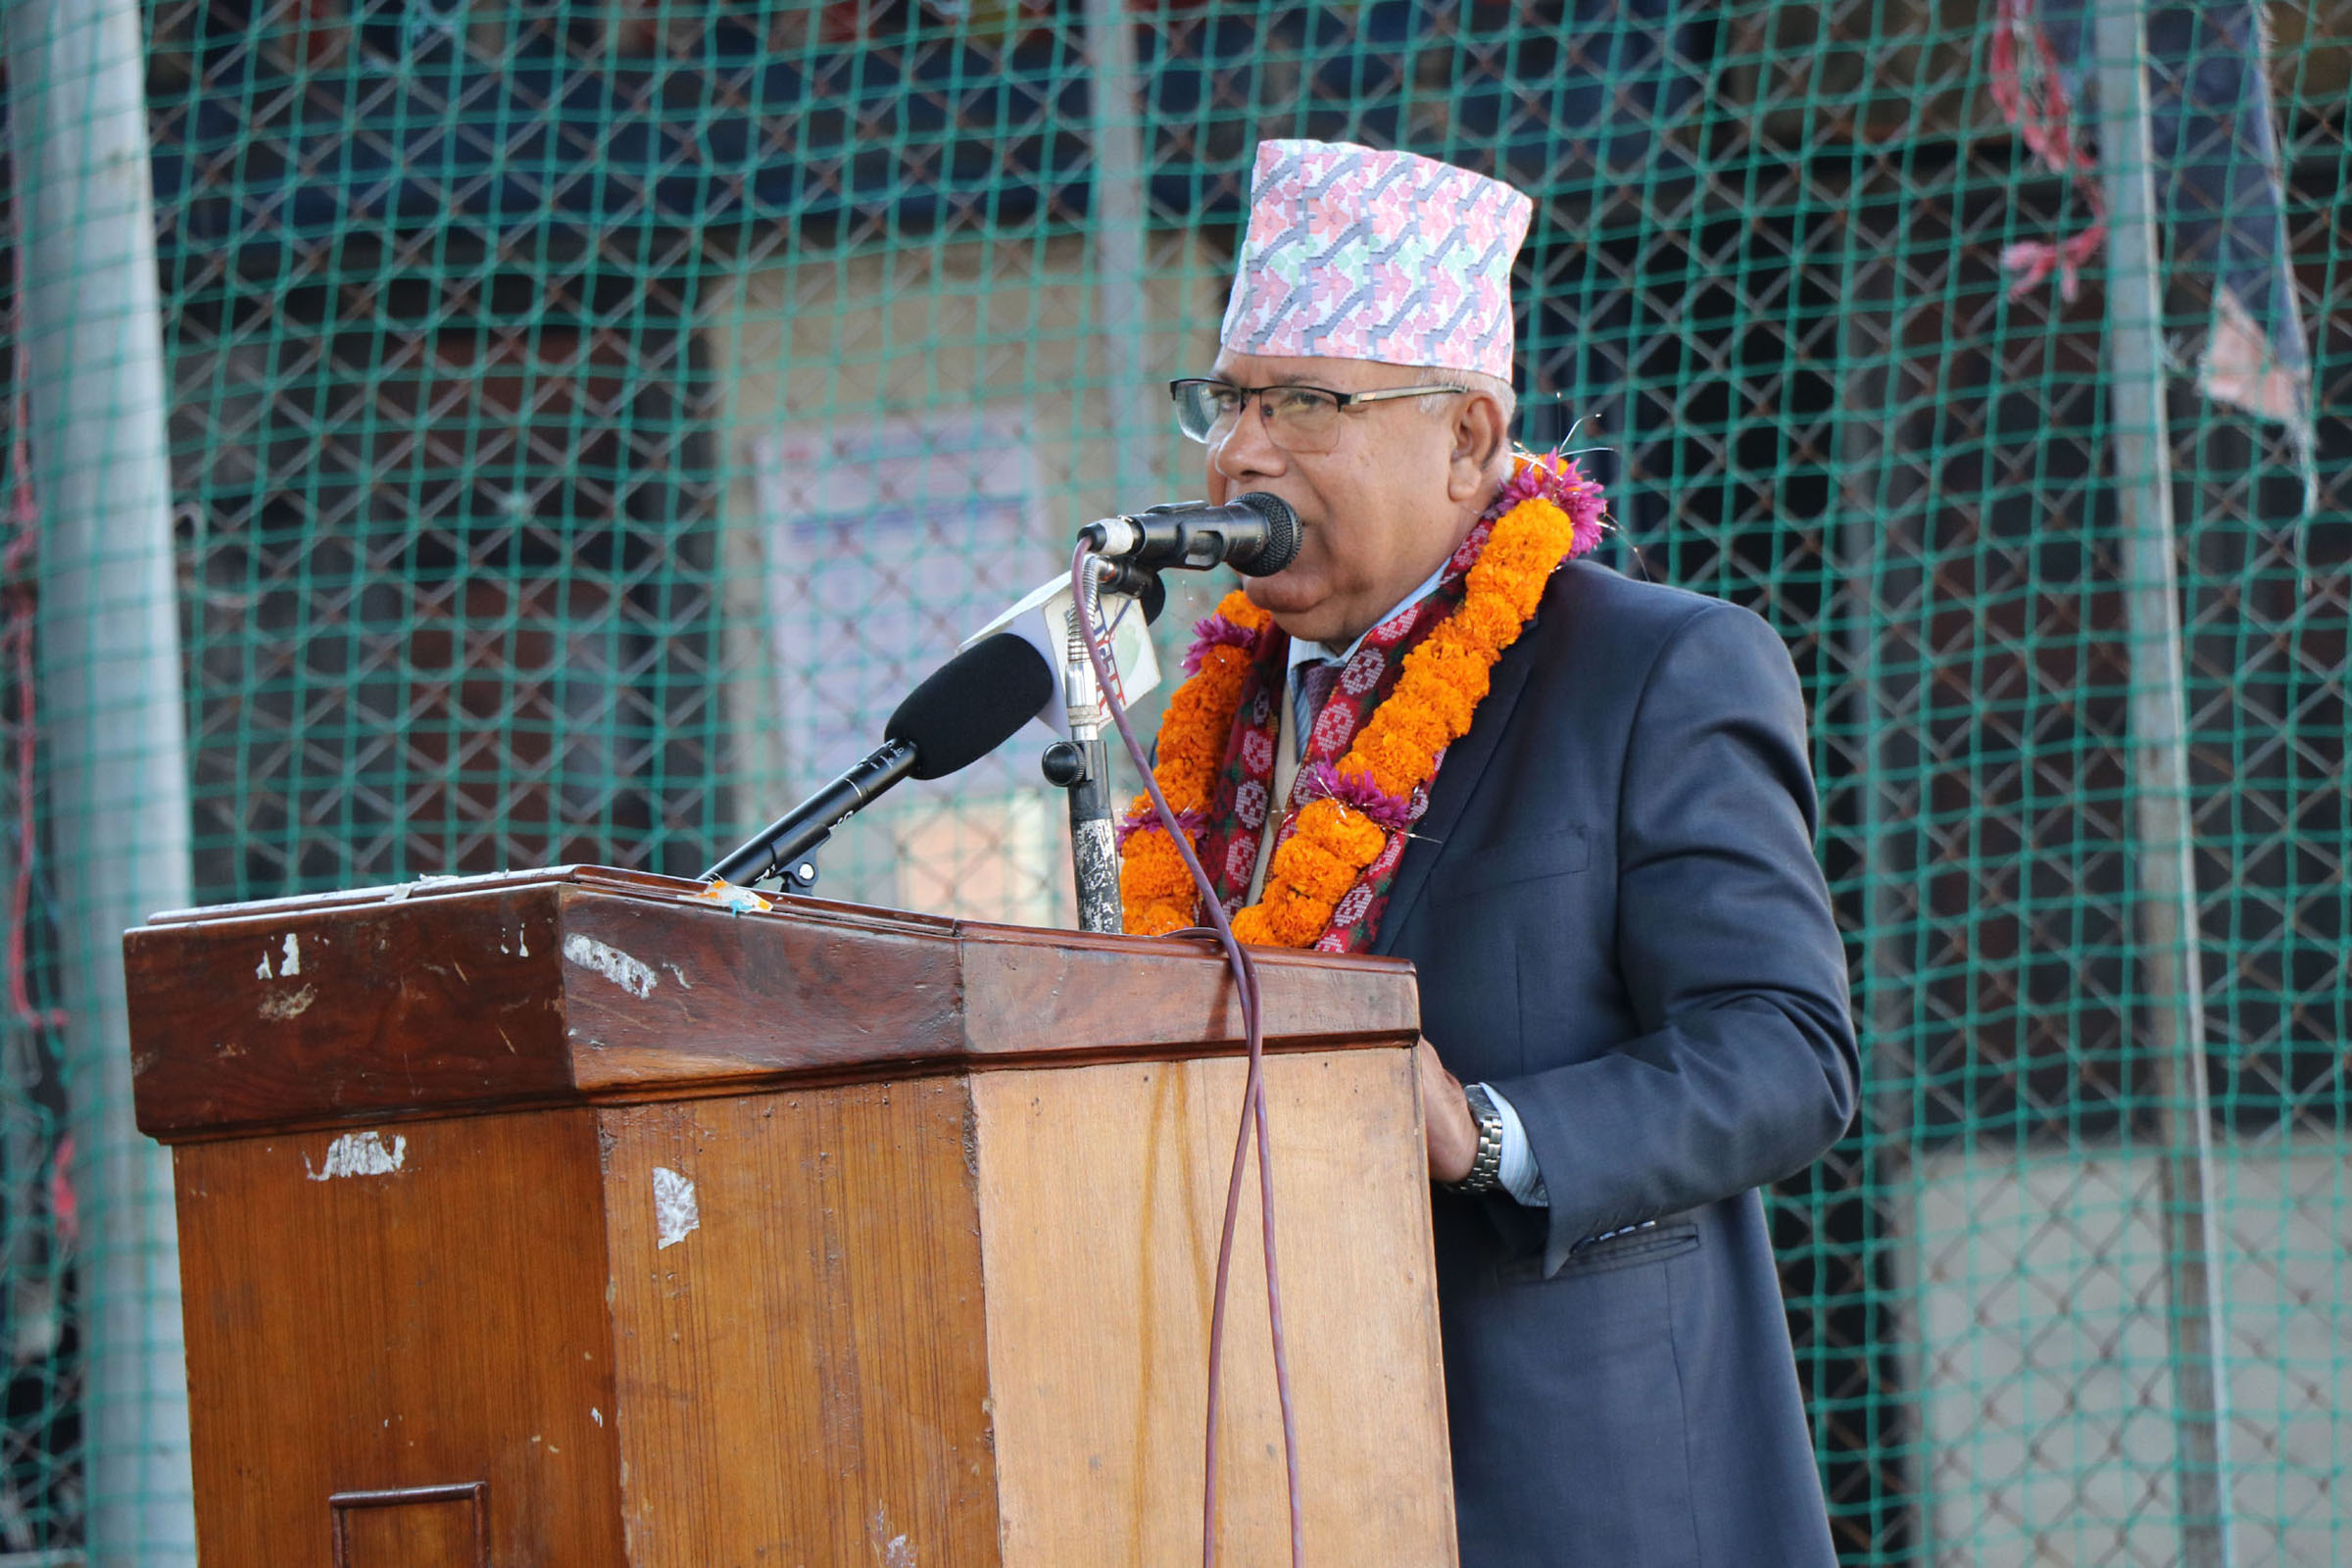 Possibility of forming government with Congress is over now: Madhav Nepal